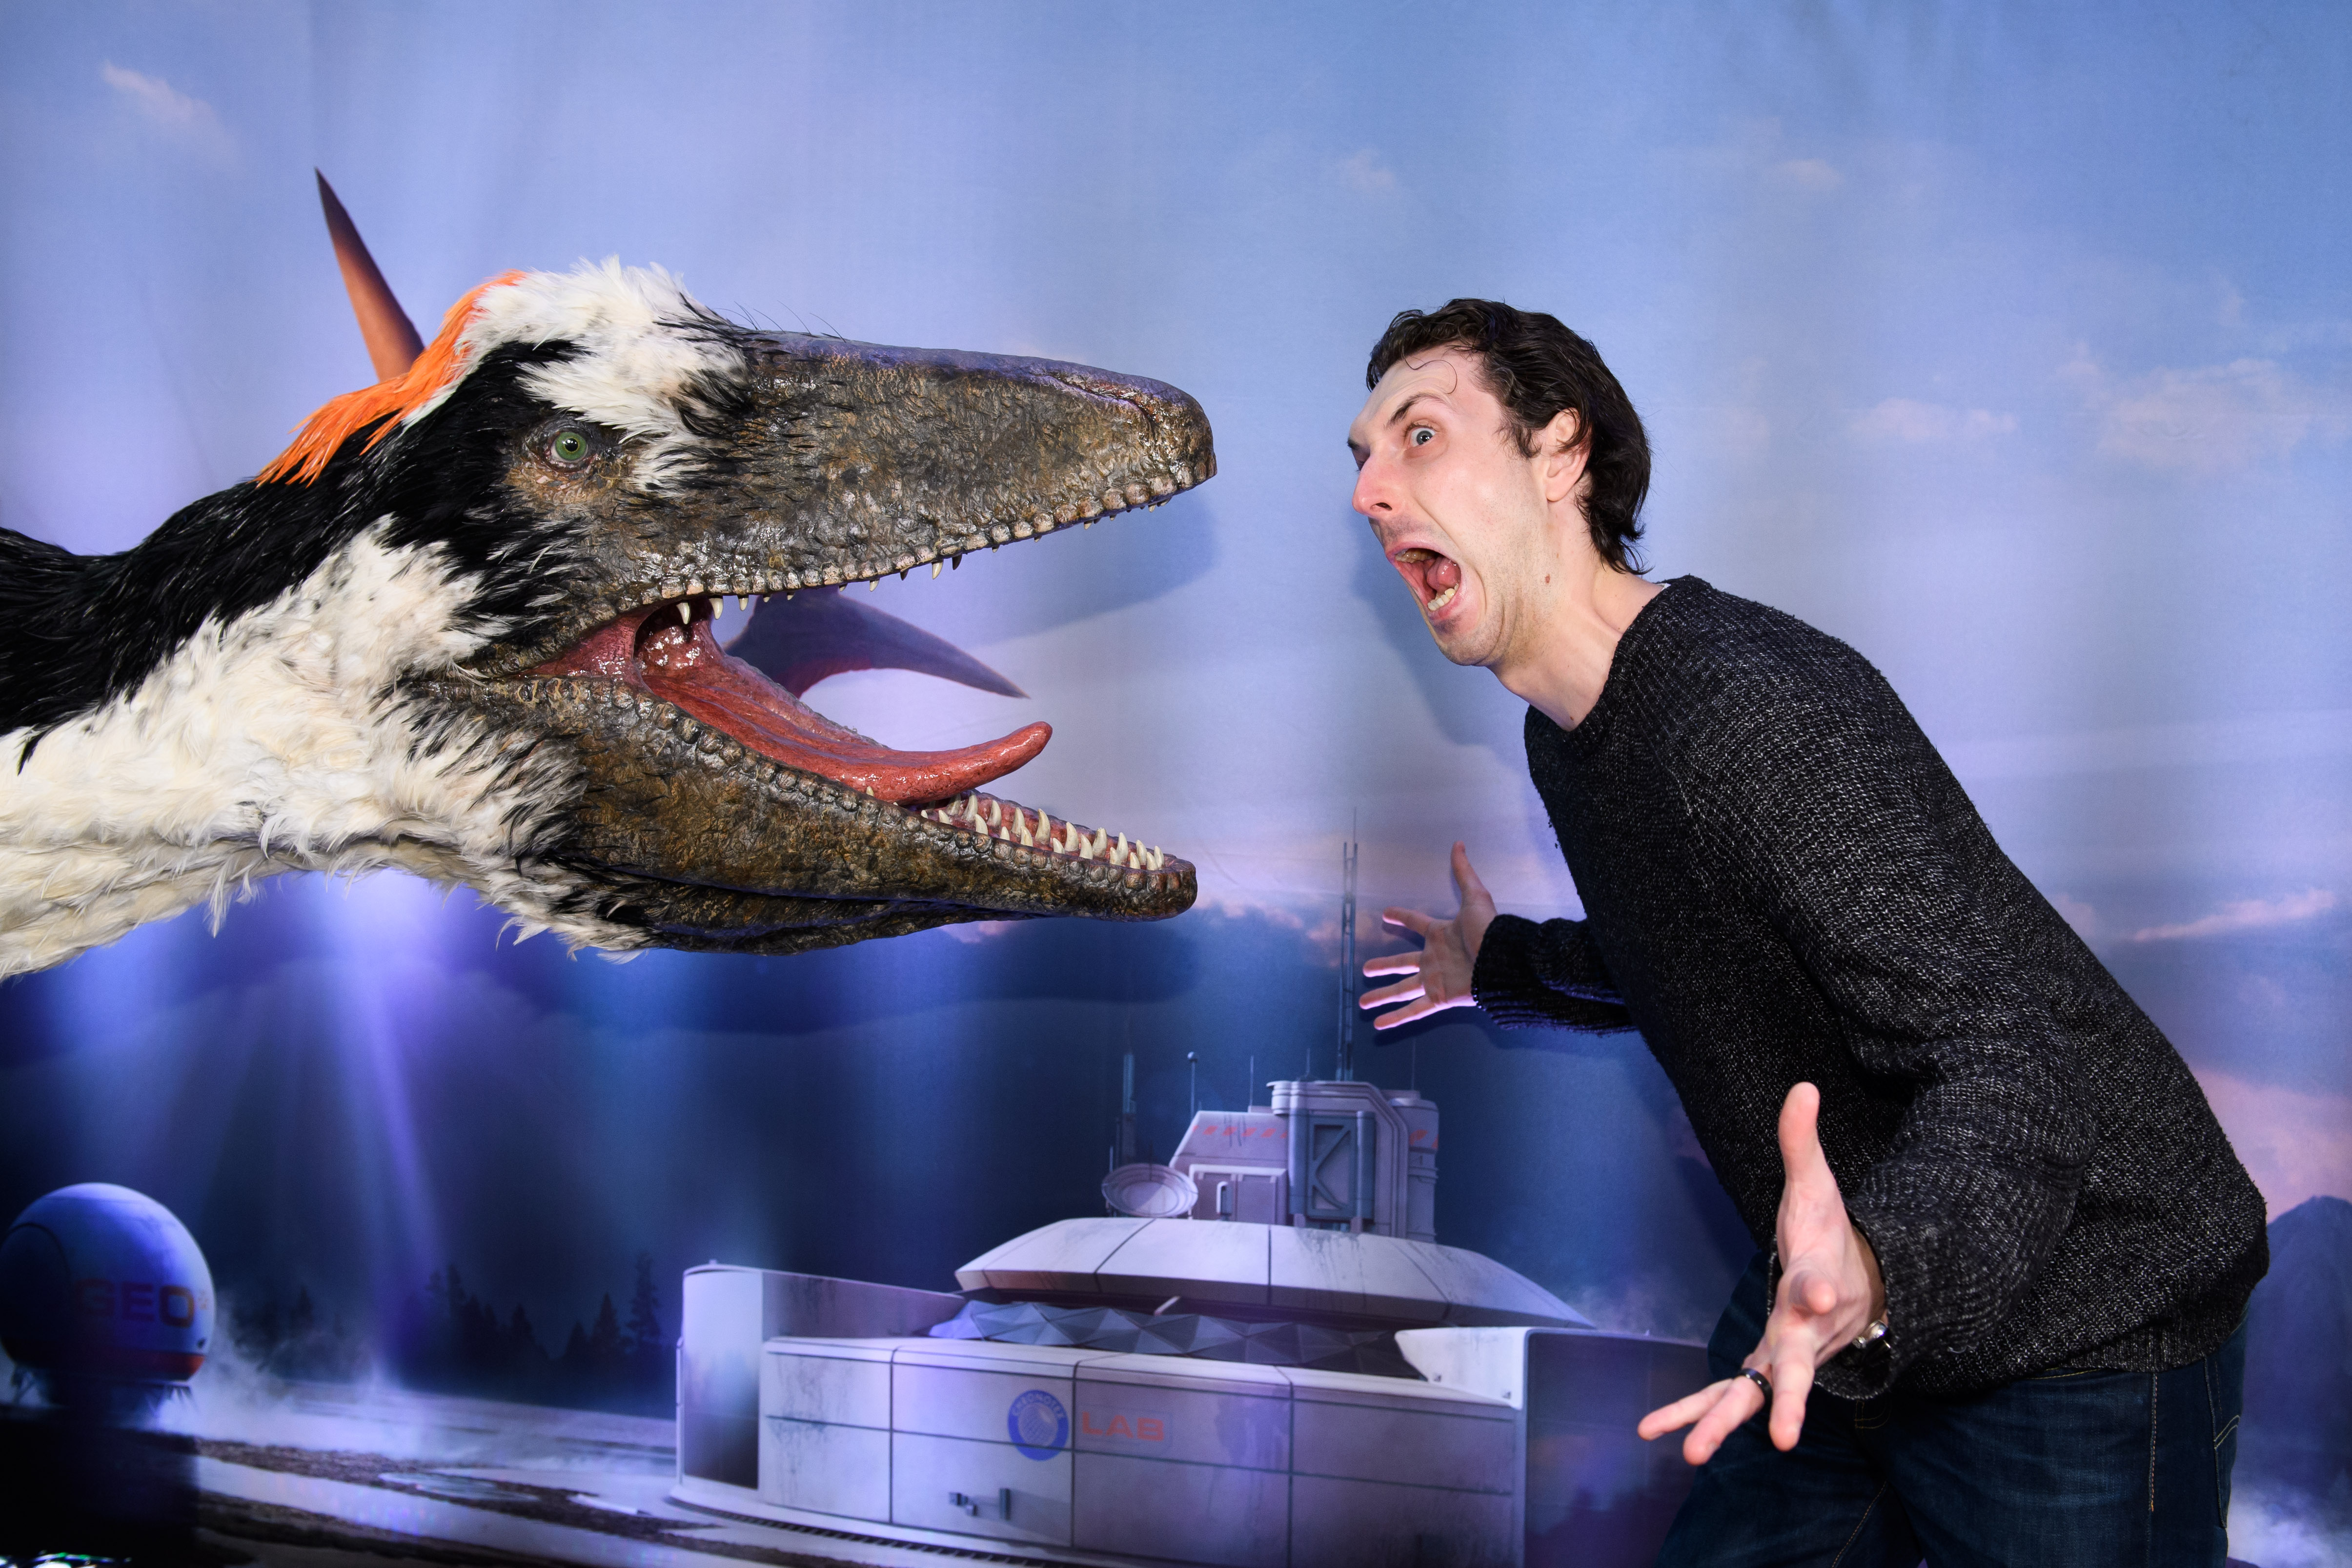 Blake Harrison at the launch of Dinosaurs in the Wild in London